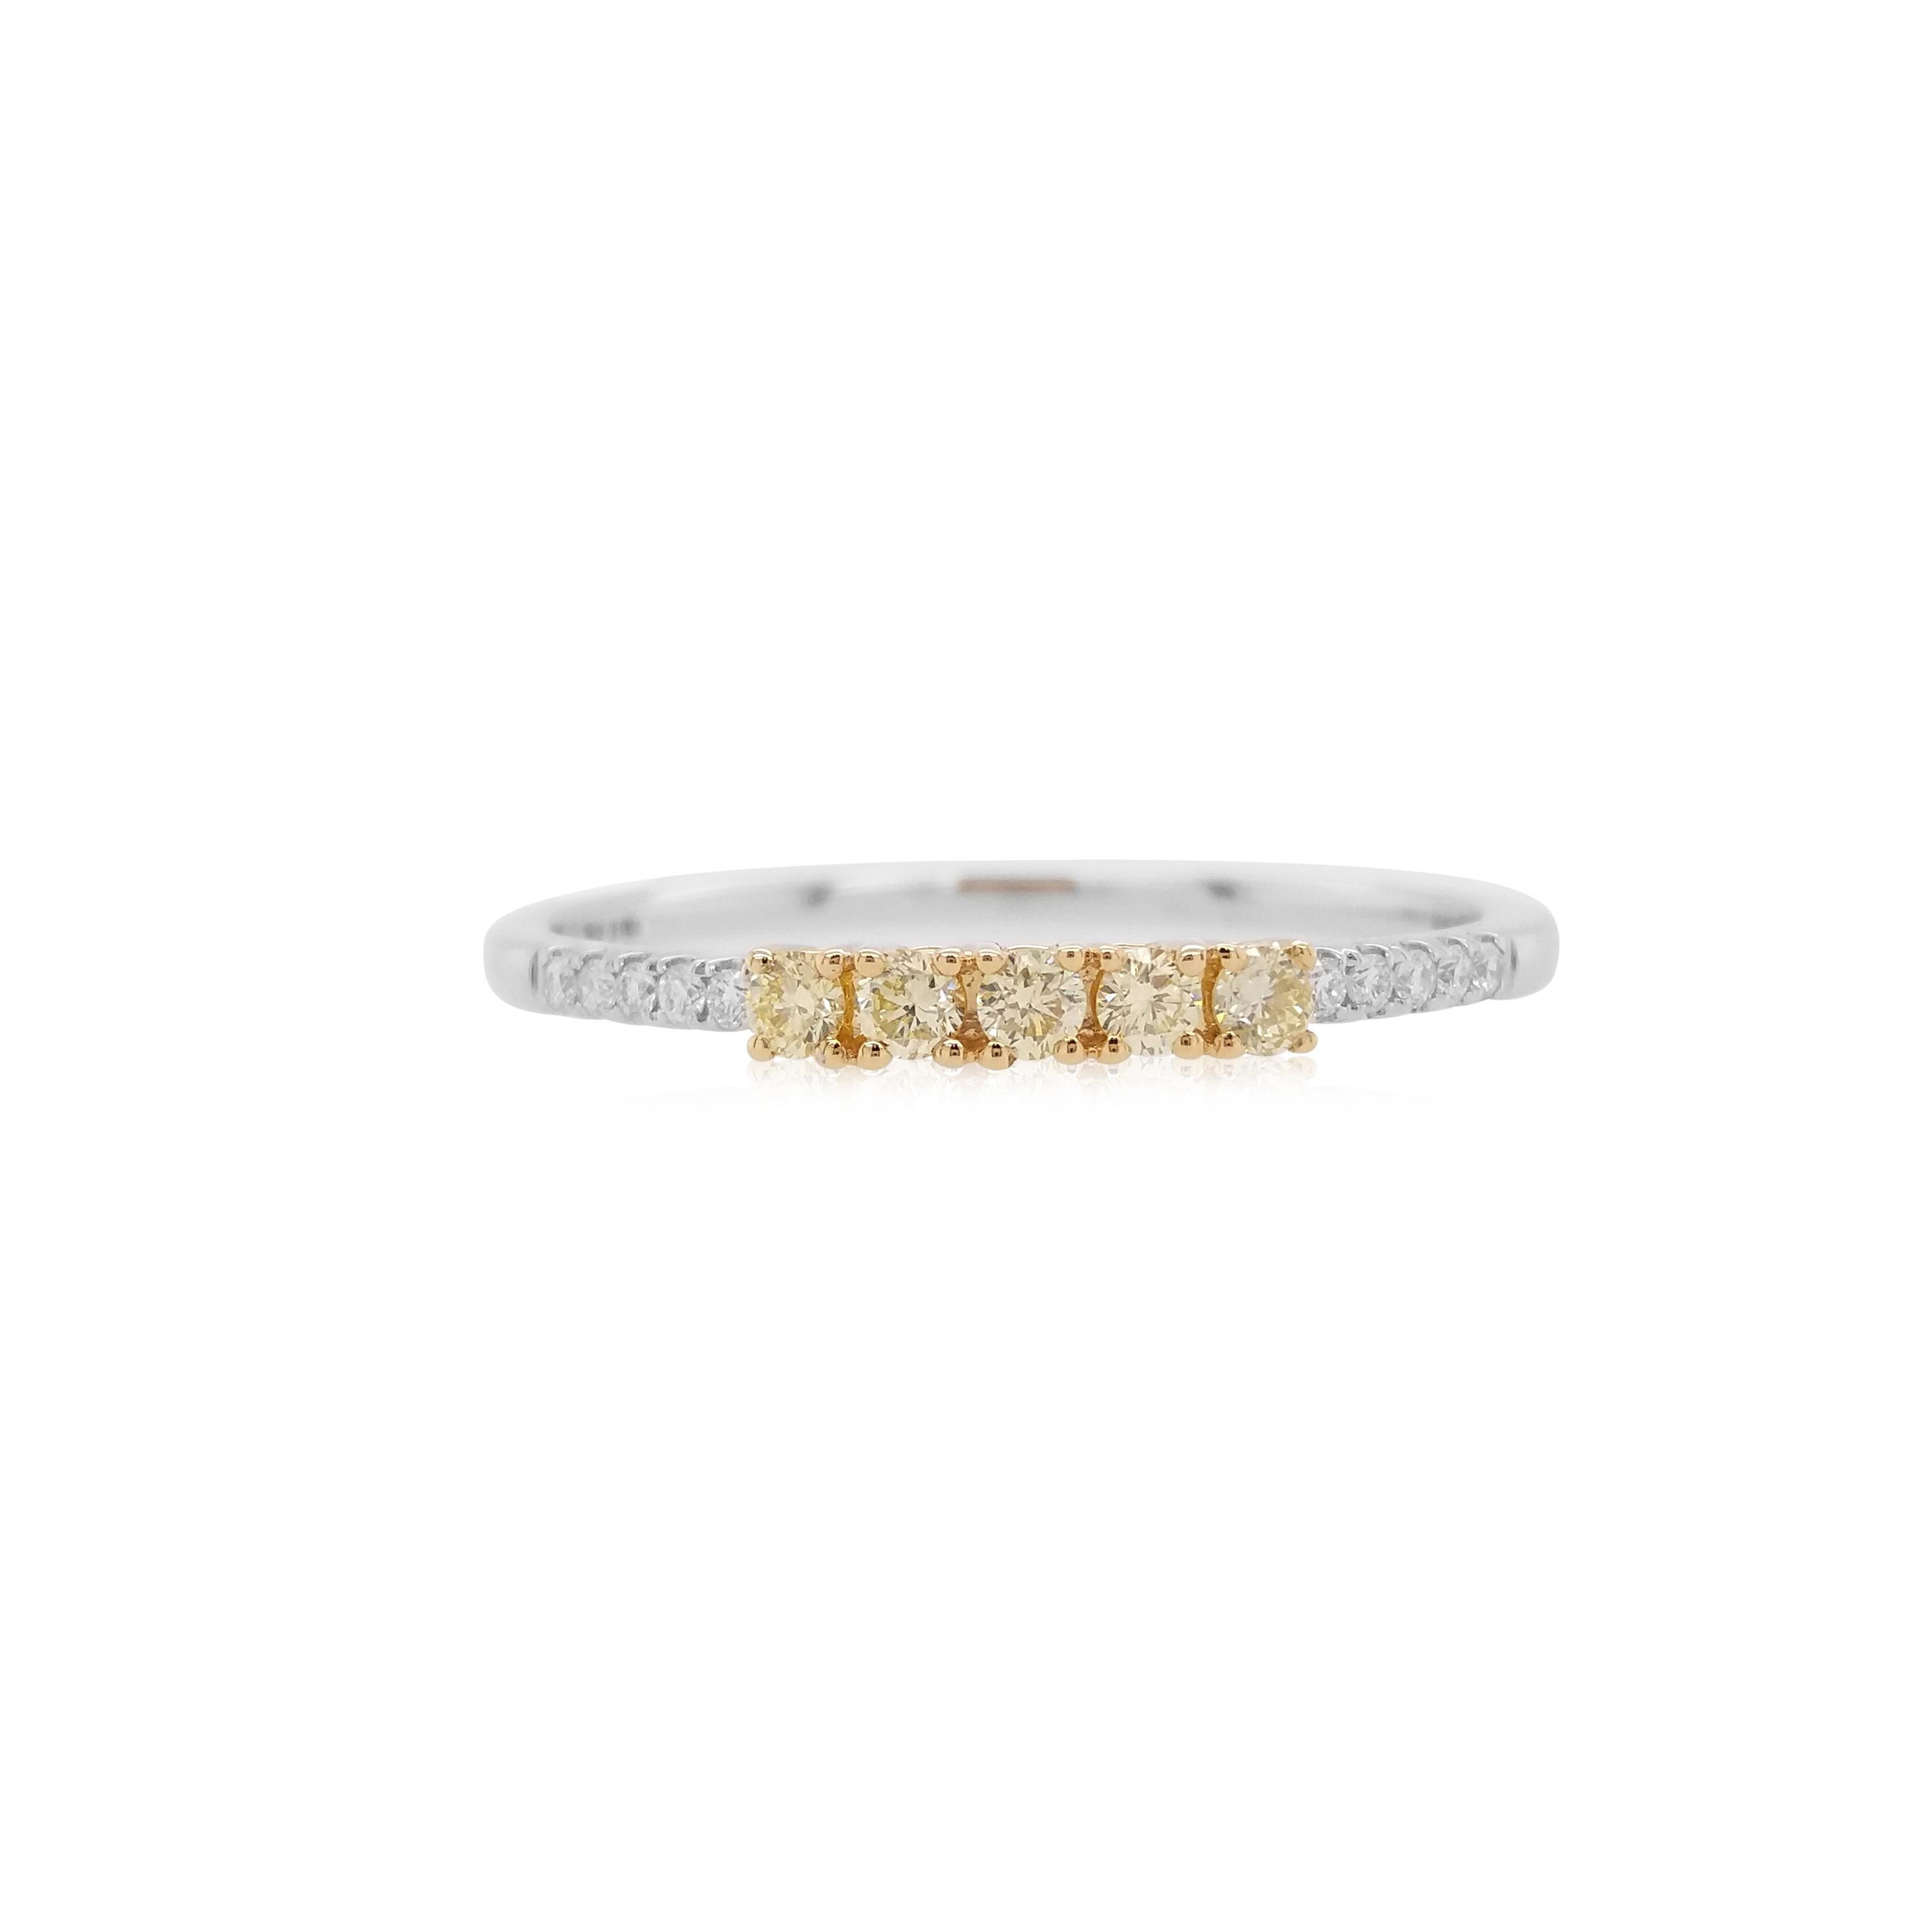 An elegant ring with round brilliant cut Yellow diamonds set in a band of white diamonds

Yellow Diamonds- 0.120 cts
White Diamond - 0.05 cts

HYT Jewelry is a privately owned company headquartered in Hong Kong, with branches in Tokyo, New York, and